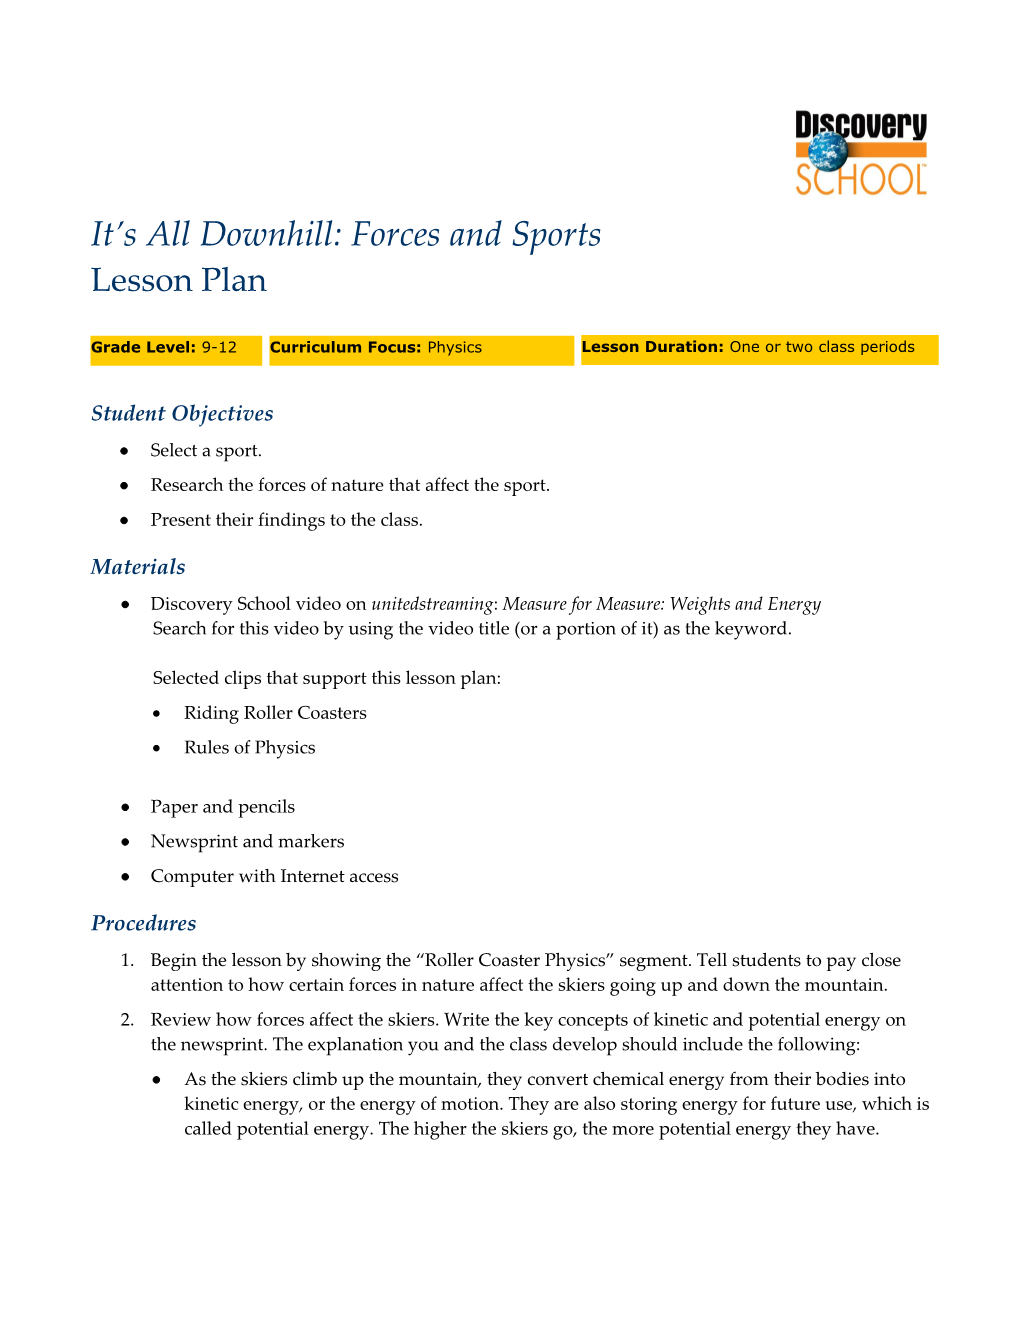 It S All Downhill: Forces and Sports 1